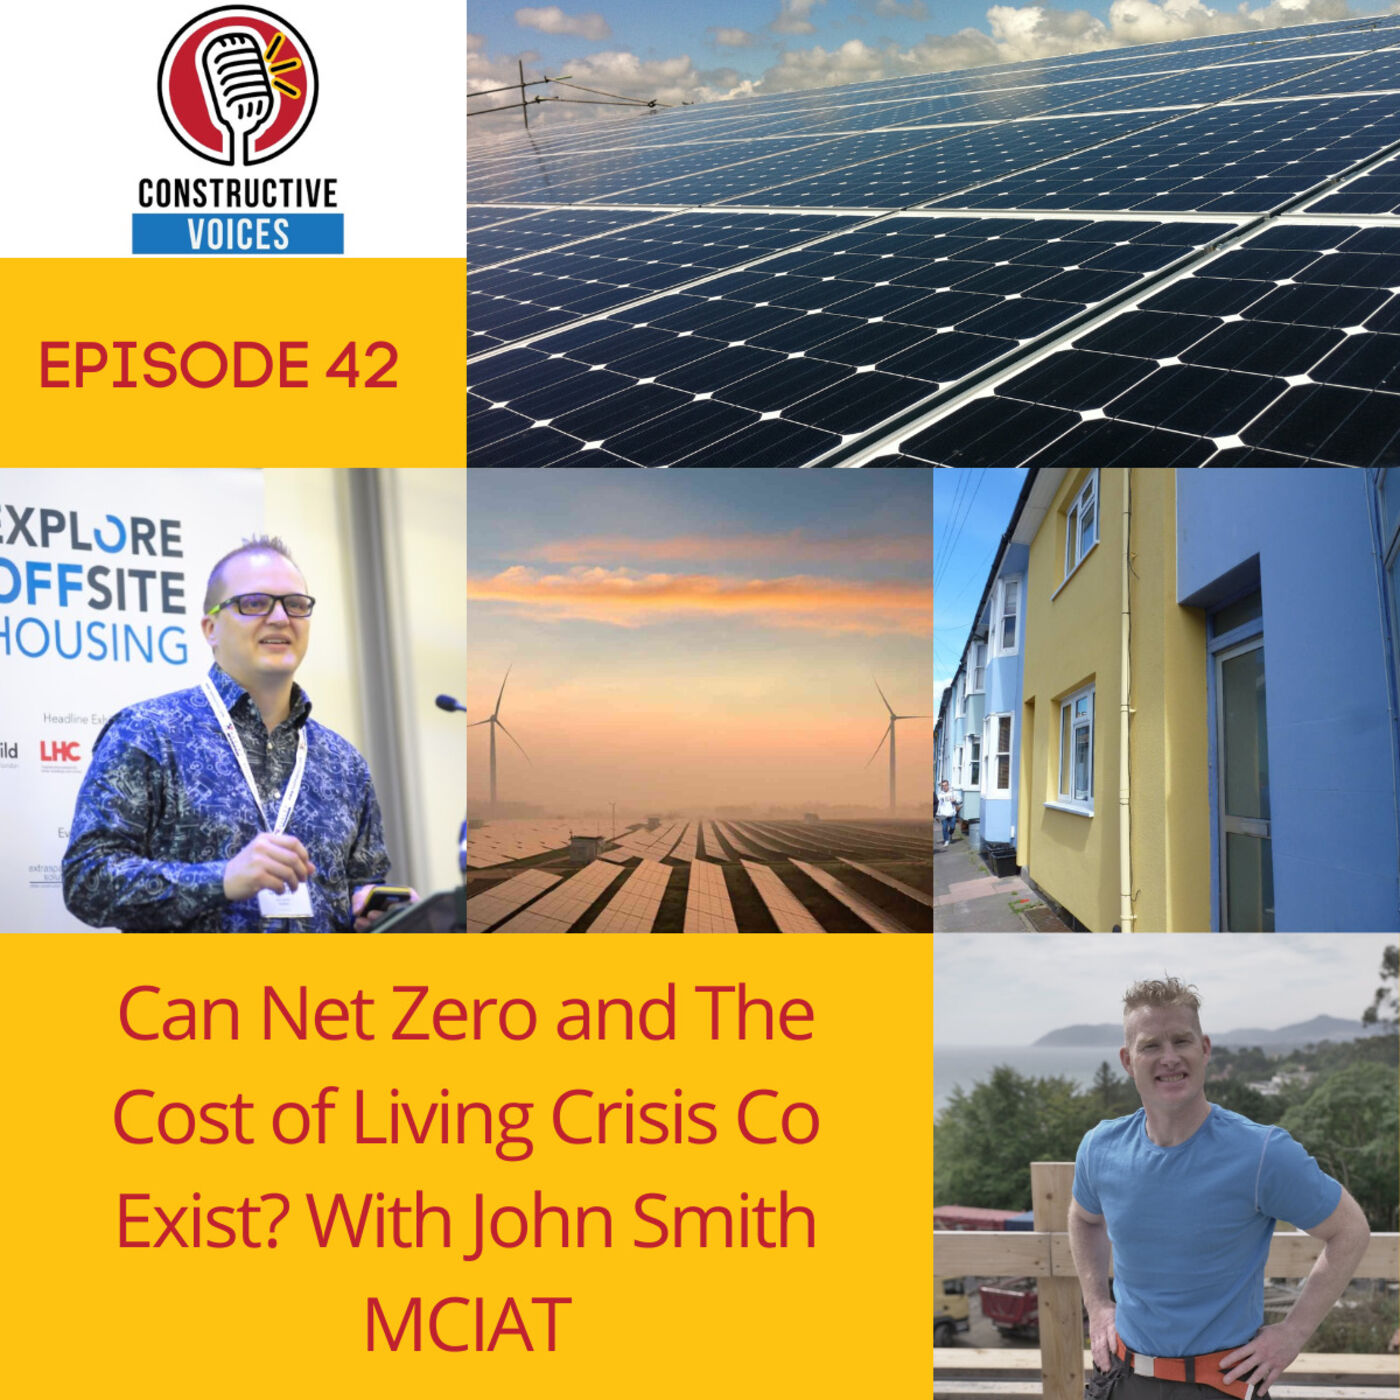 Can Net Zero and The Cost of Living Crisis Co Exist? With John Smith MCIAT